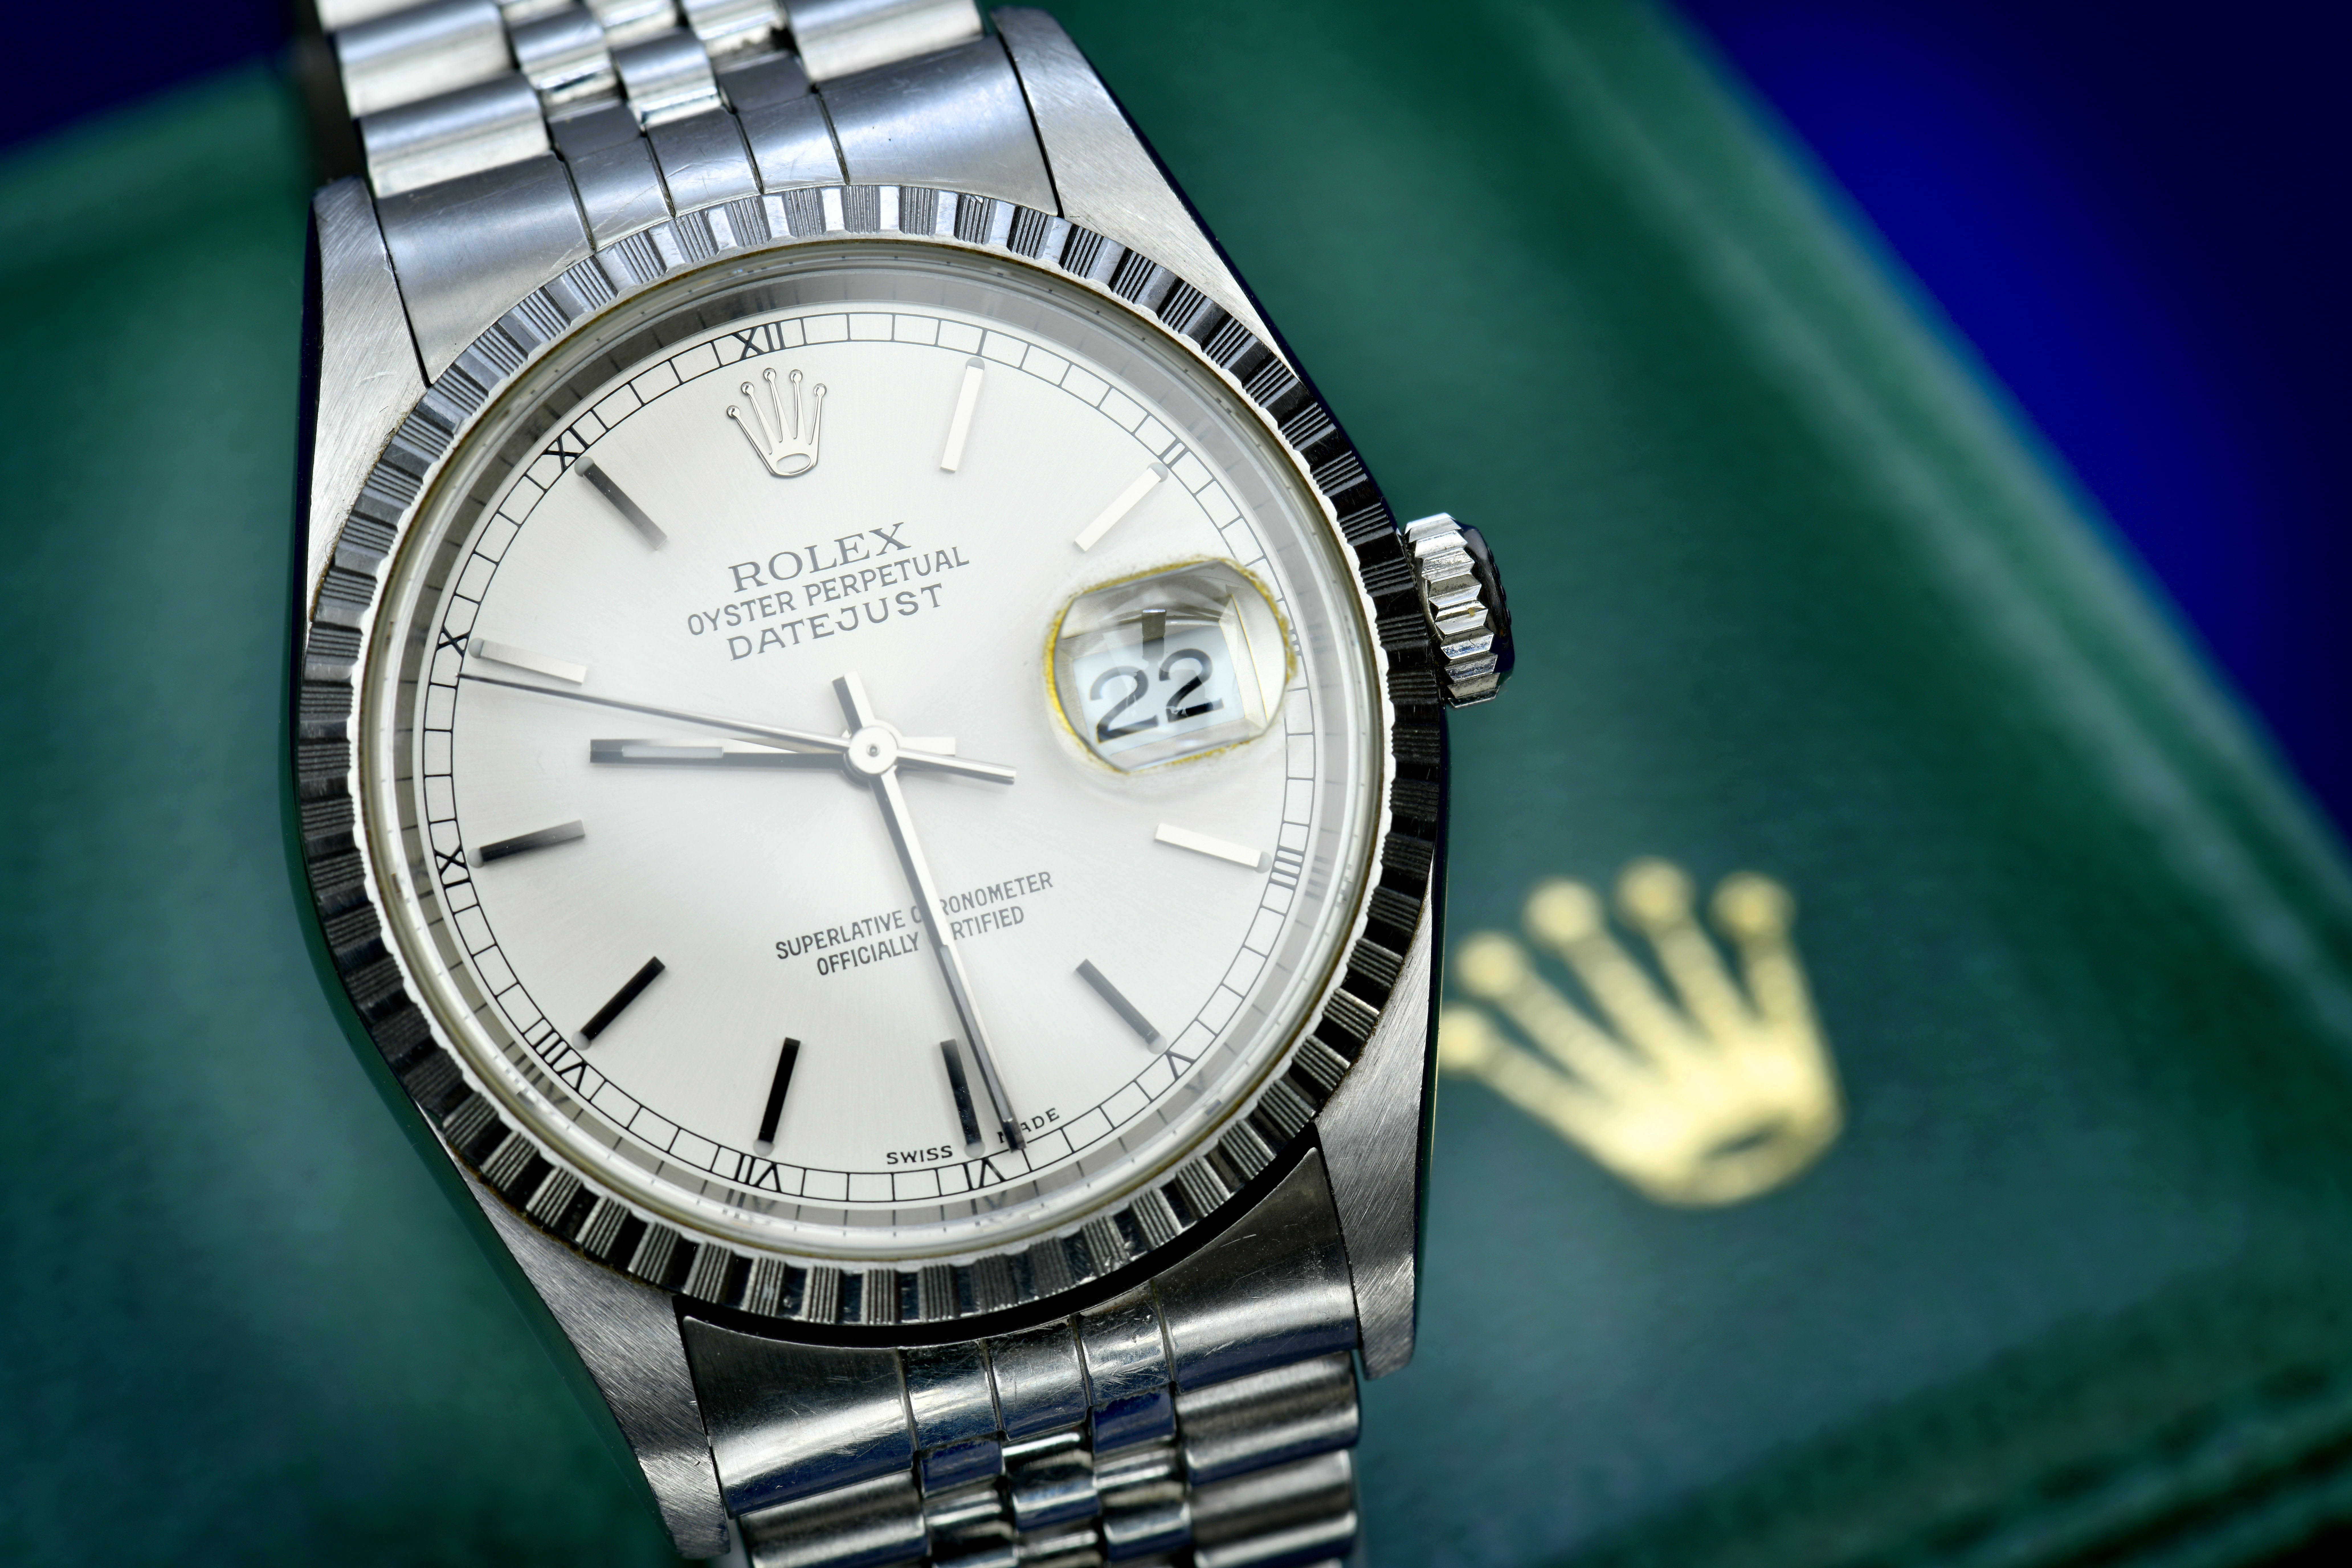 Rolex Oyster Perpetual Datejust gentleman's wristwatch ref. 16220 with date aperture, luminous - Image 3 of 12